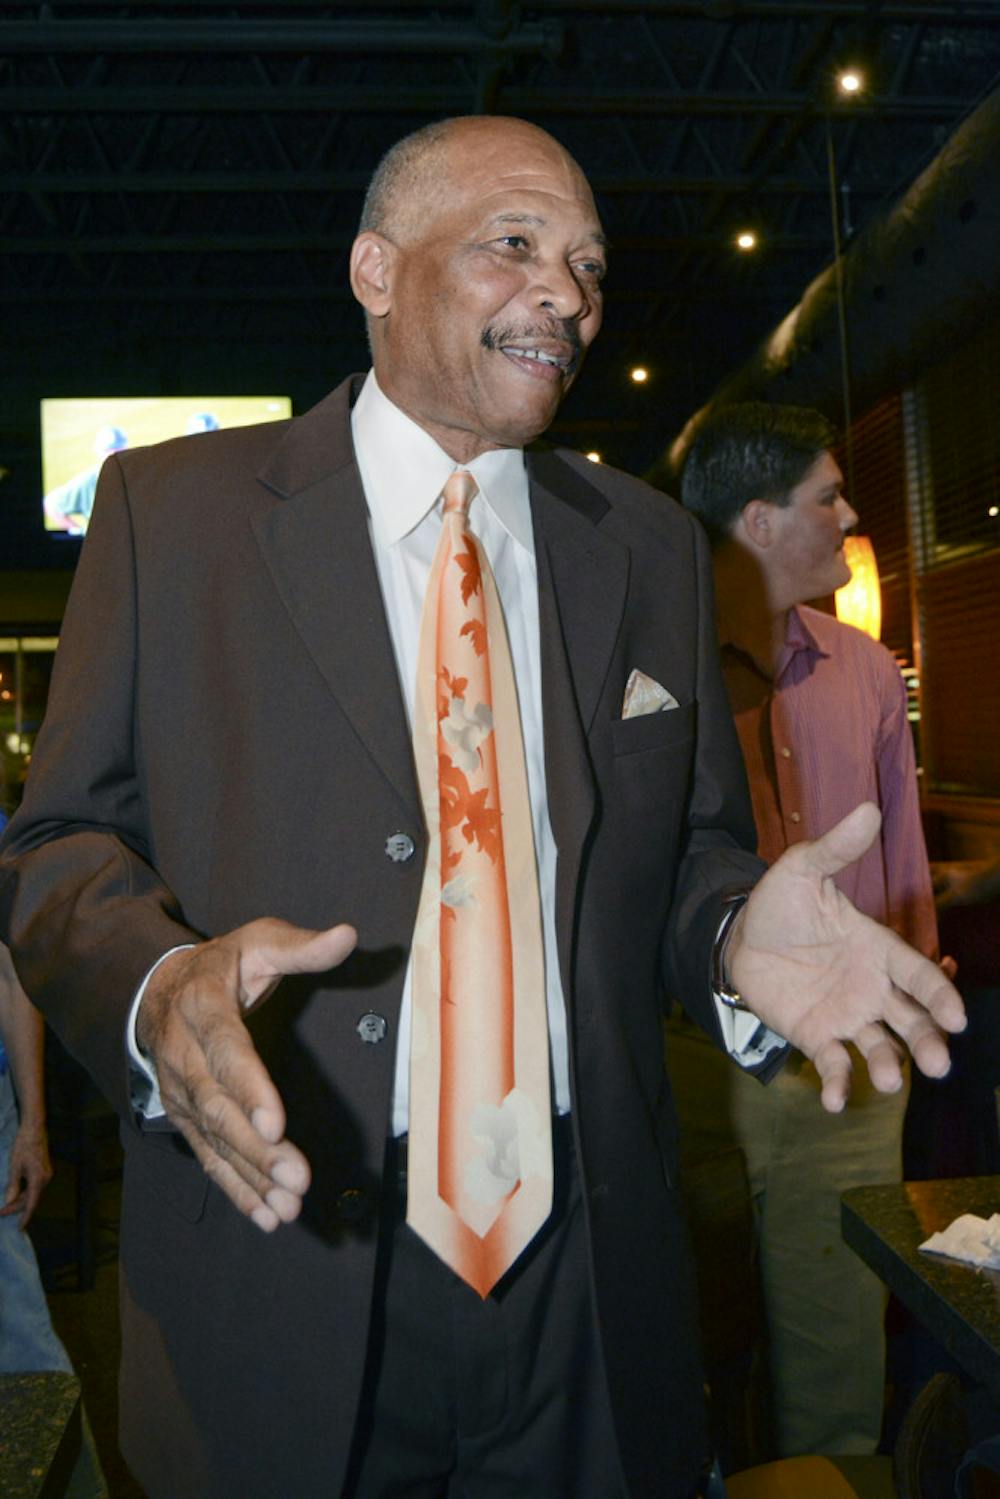 <p>Commissioner-elect Charles Goston celebrates his victory over Yvonne Hinson-Rawls in the District 1 commissioner seat election in Piesanos Stone Fired Pizza on University Avenue on Tuesday night. Goston won with 913 votes against Hinson-Rawls’ 844.</p>